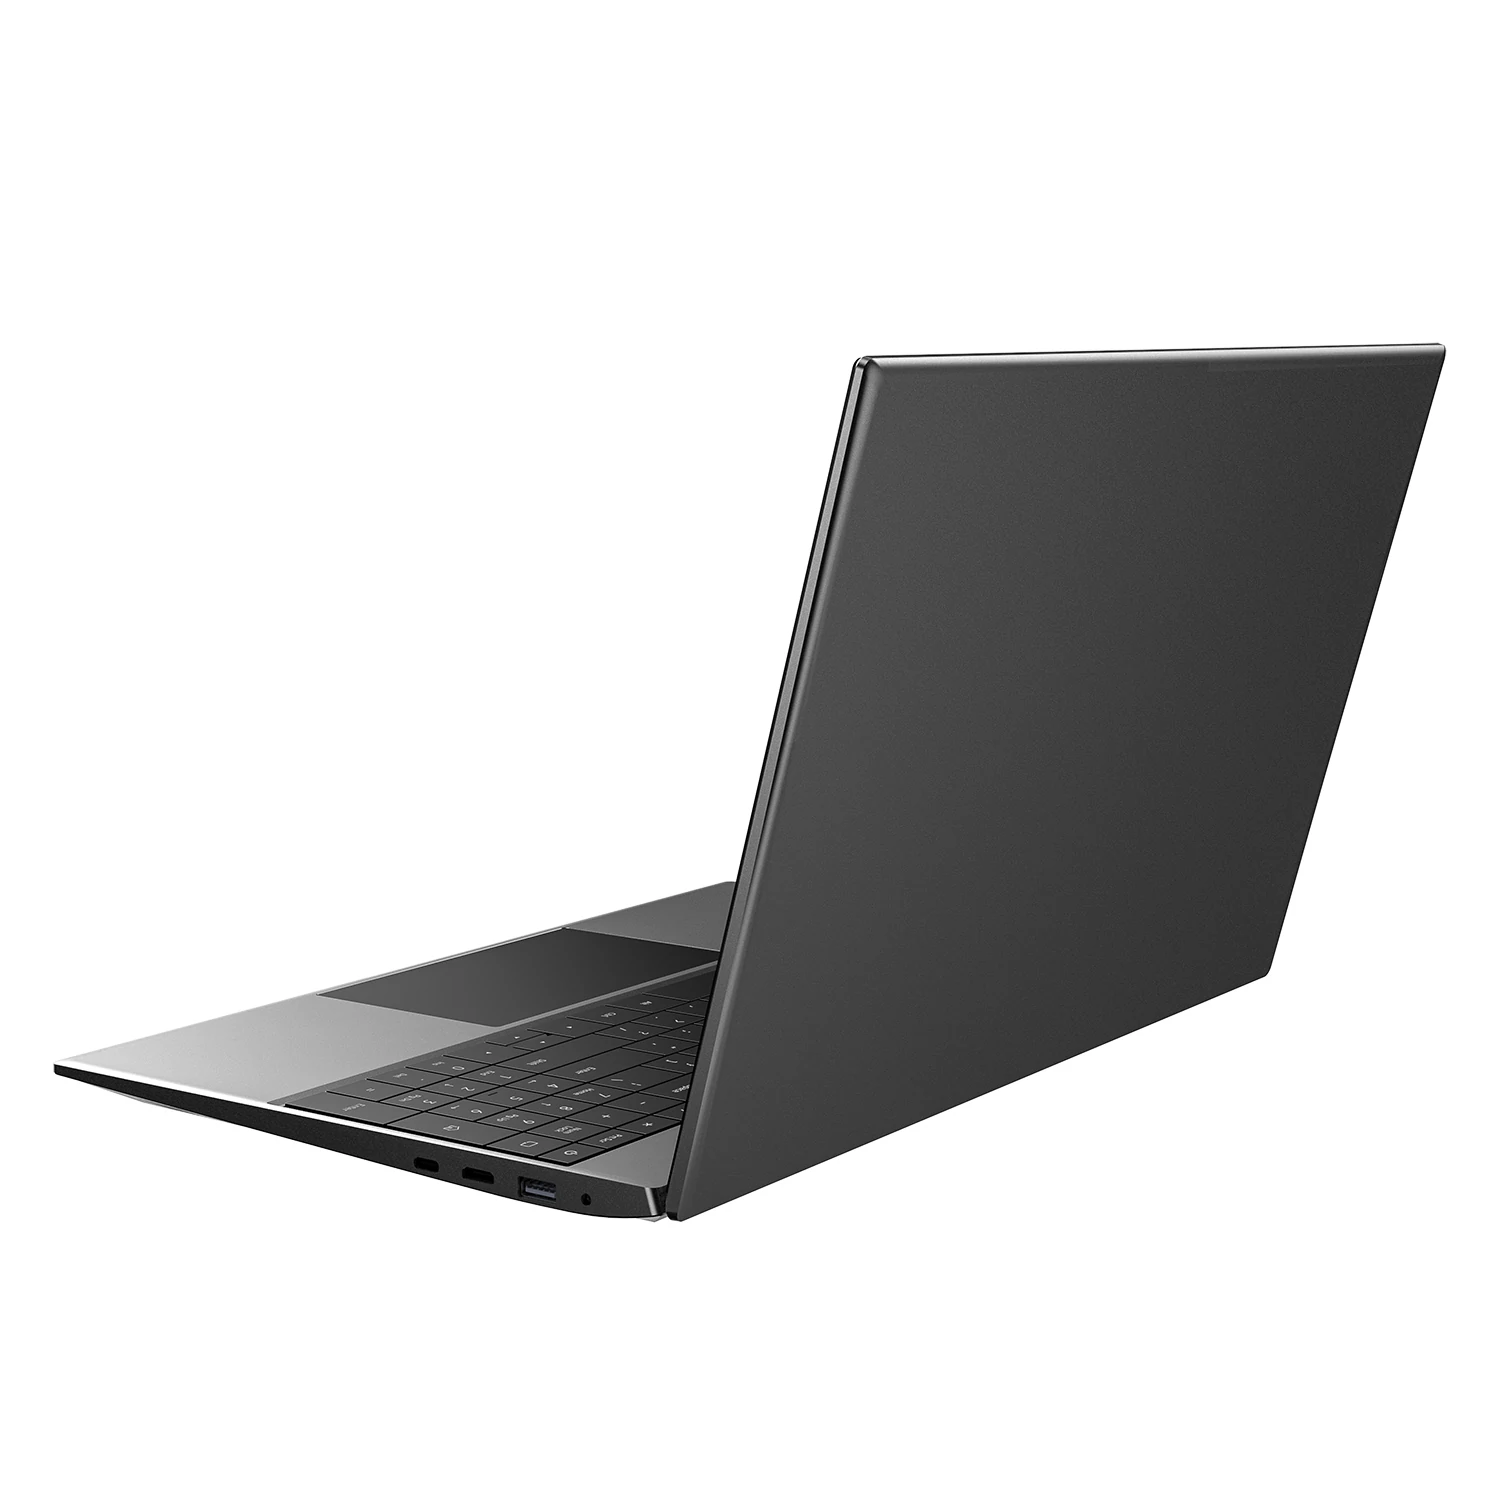 Find DERE TBOOK T11 Laptop 15 6 Inch Intel i7 1165G7 IntelÂ IrisÂ Xe Graphics 16GB RAM 512GB SSD 1080P Screen Backlit Keyboard 45 6Wh Battery Win10 PRO Notebook for Sale on Gipsybee.com